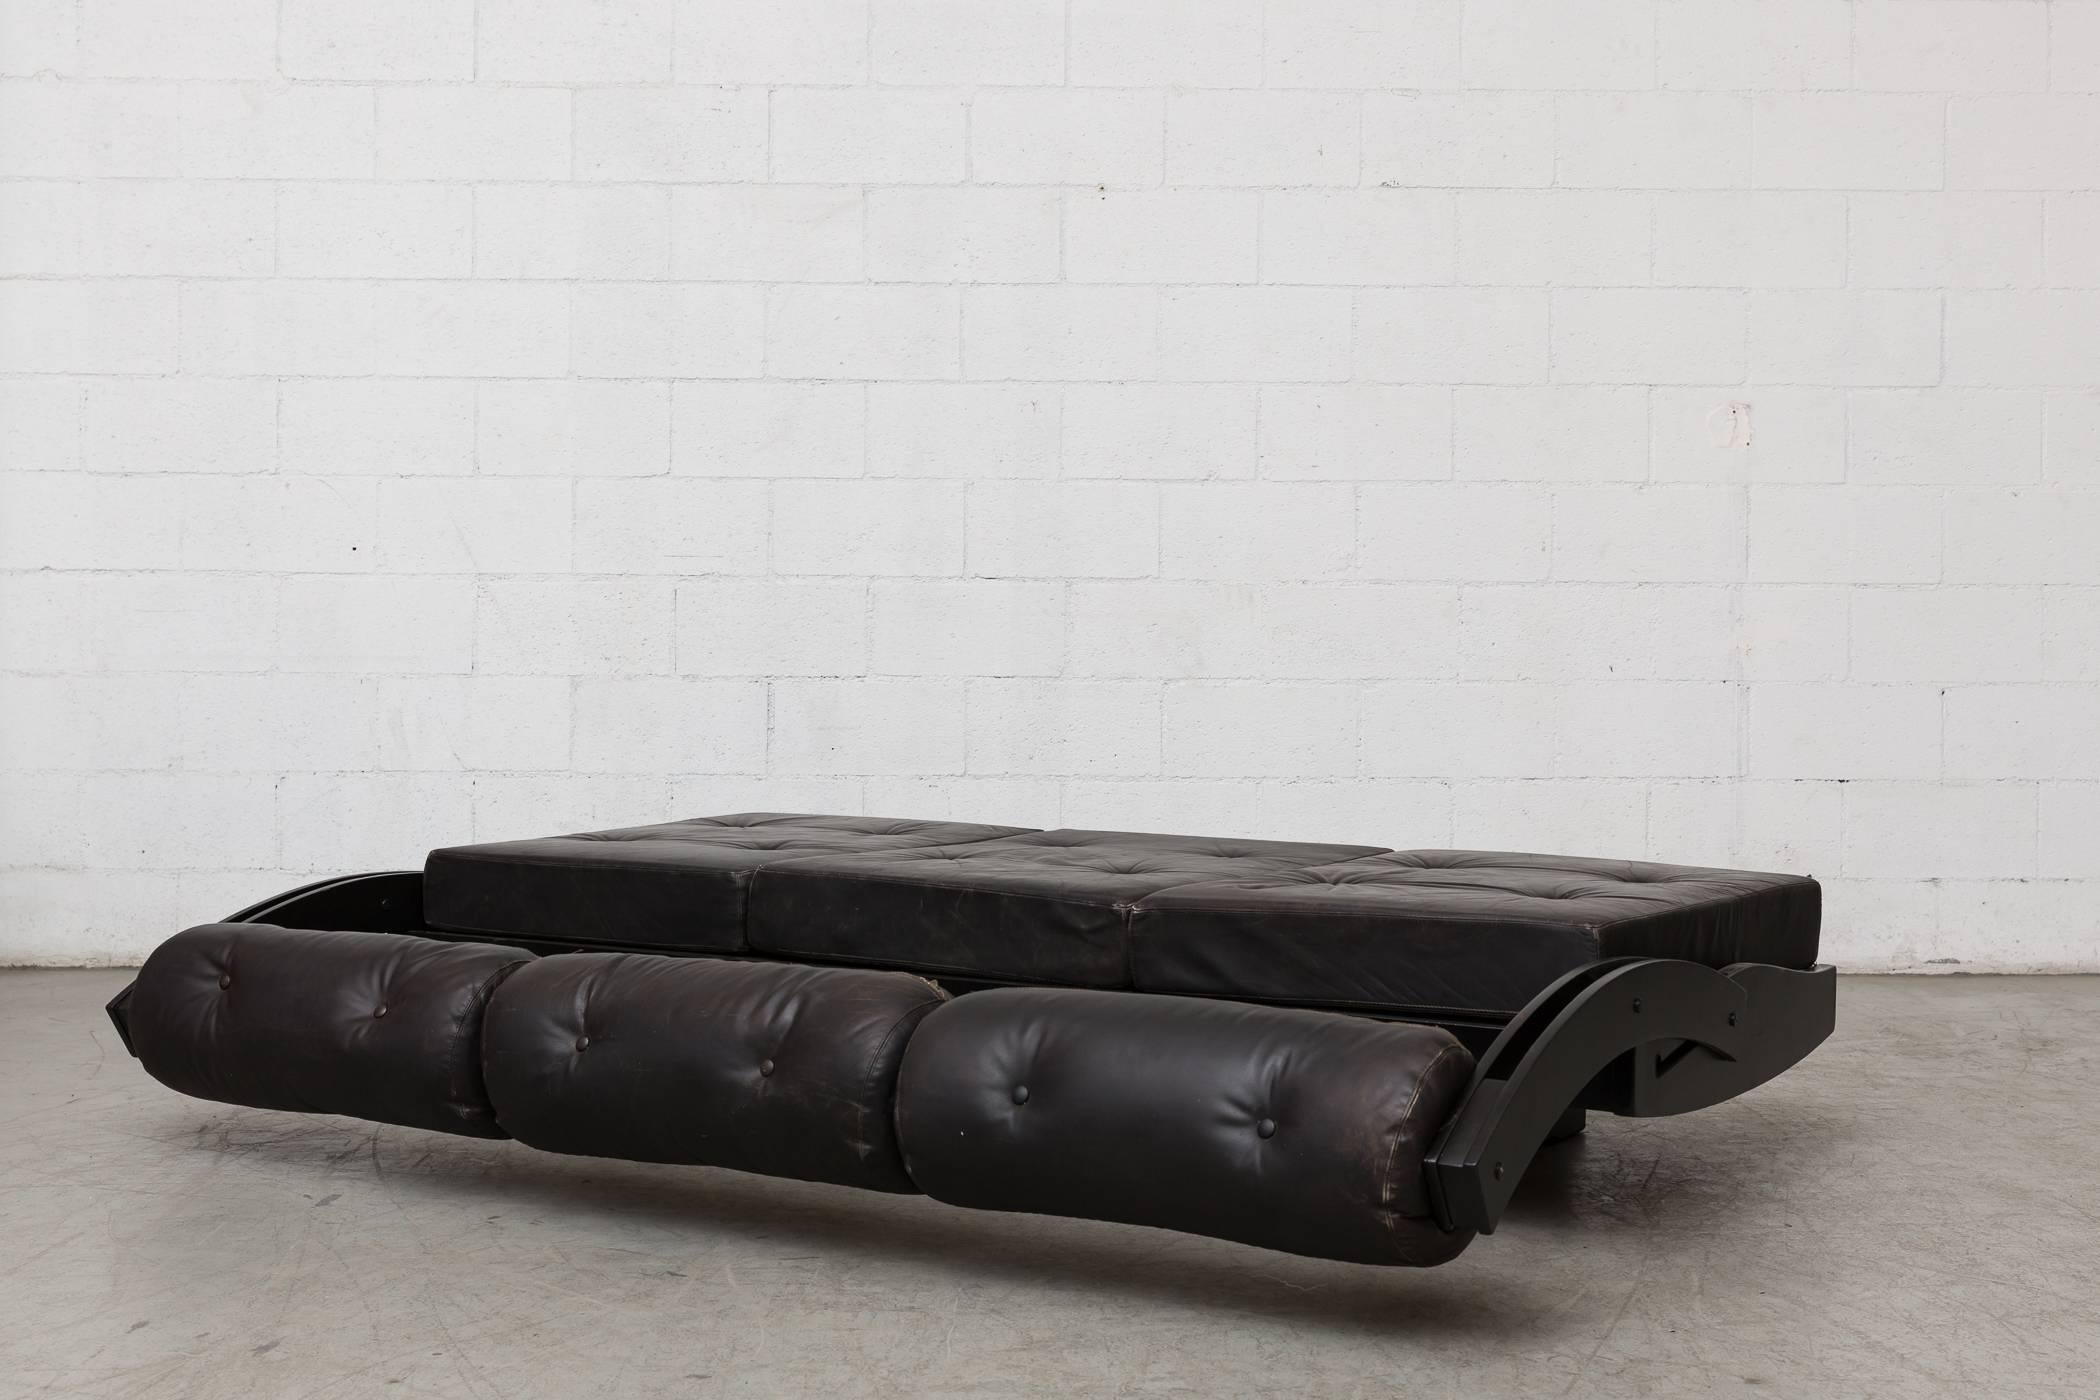 Undeniably Italian in design by Gianni Songia for Sormani, 1963, Italy. Converts into a daybed via a sliding backrest. Painted wood frame with original black leather cushions. Visible wear and patina.